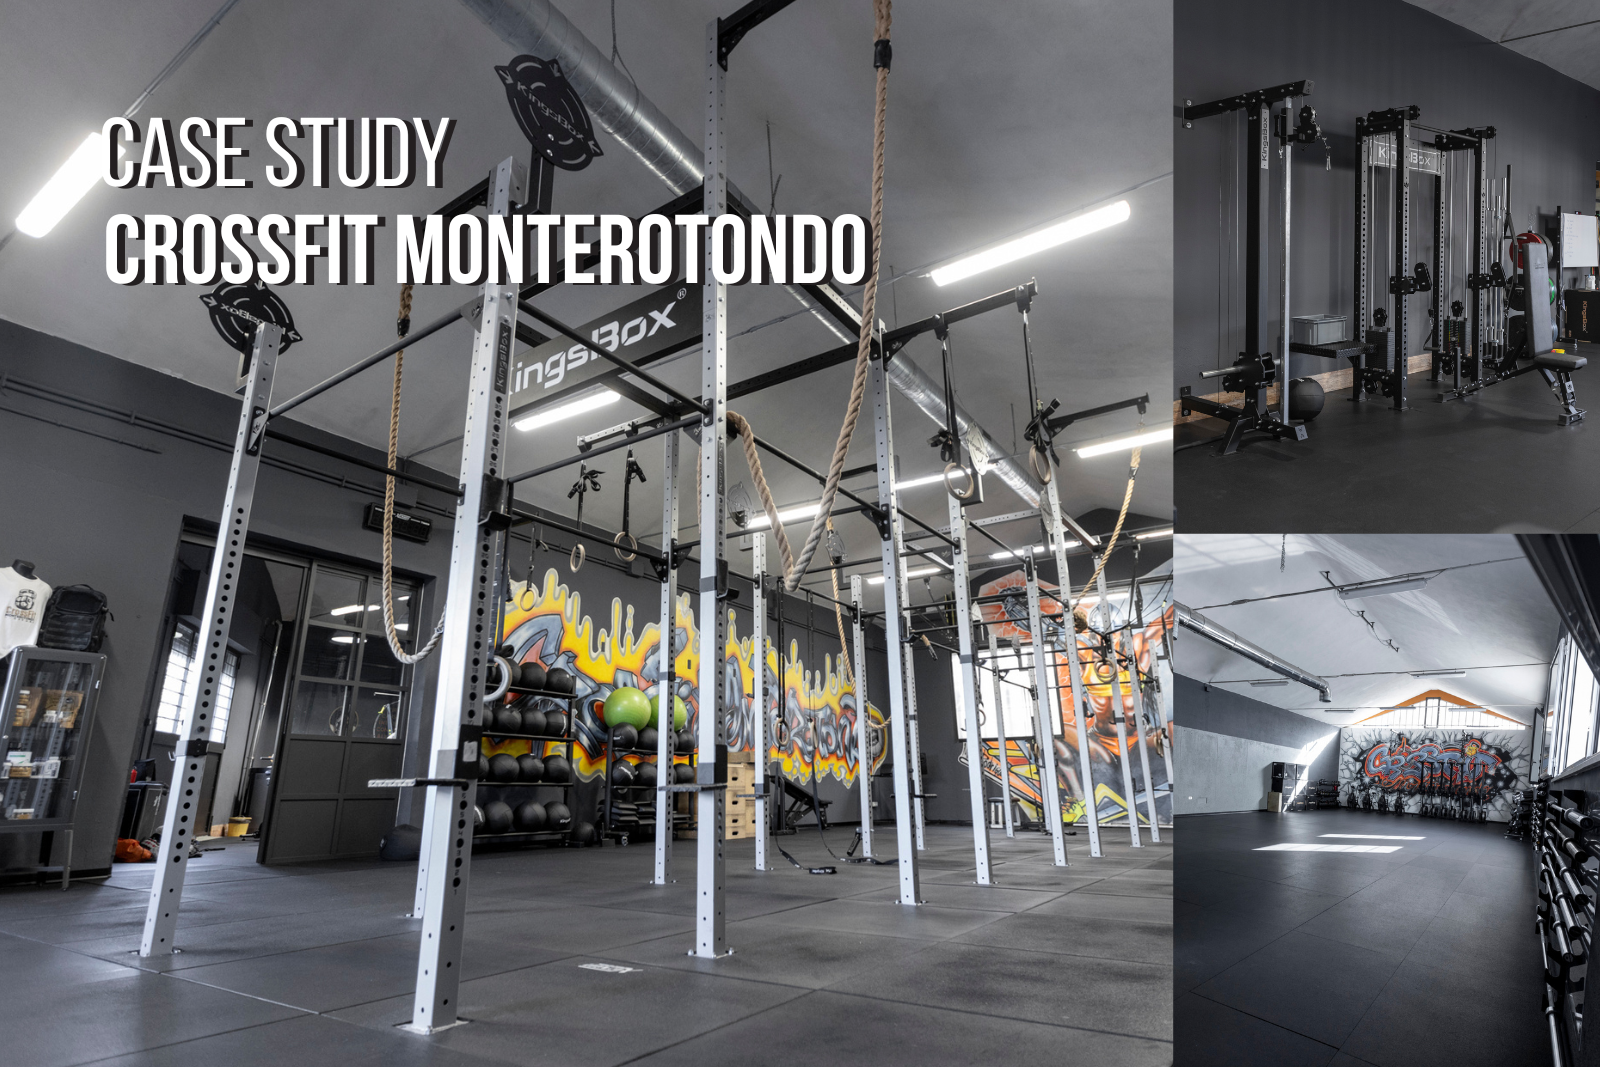 A renovation that helped them gain new customers - Crossfit Monterotondo